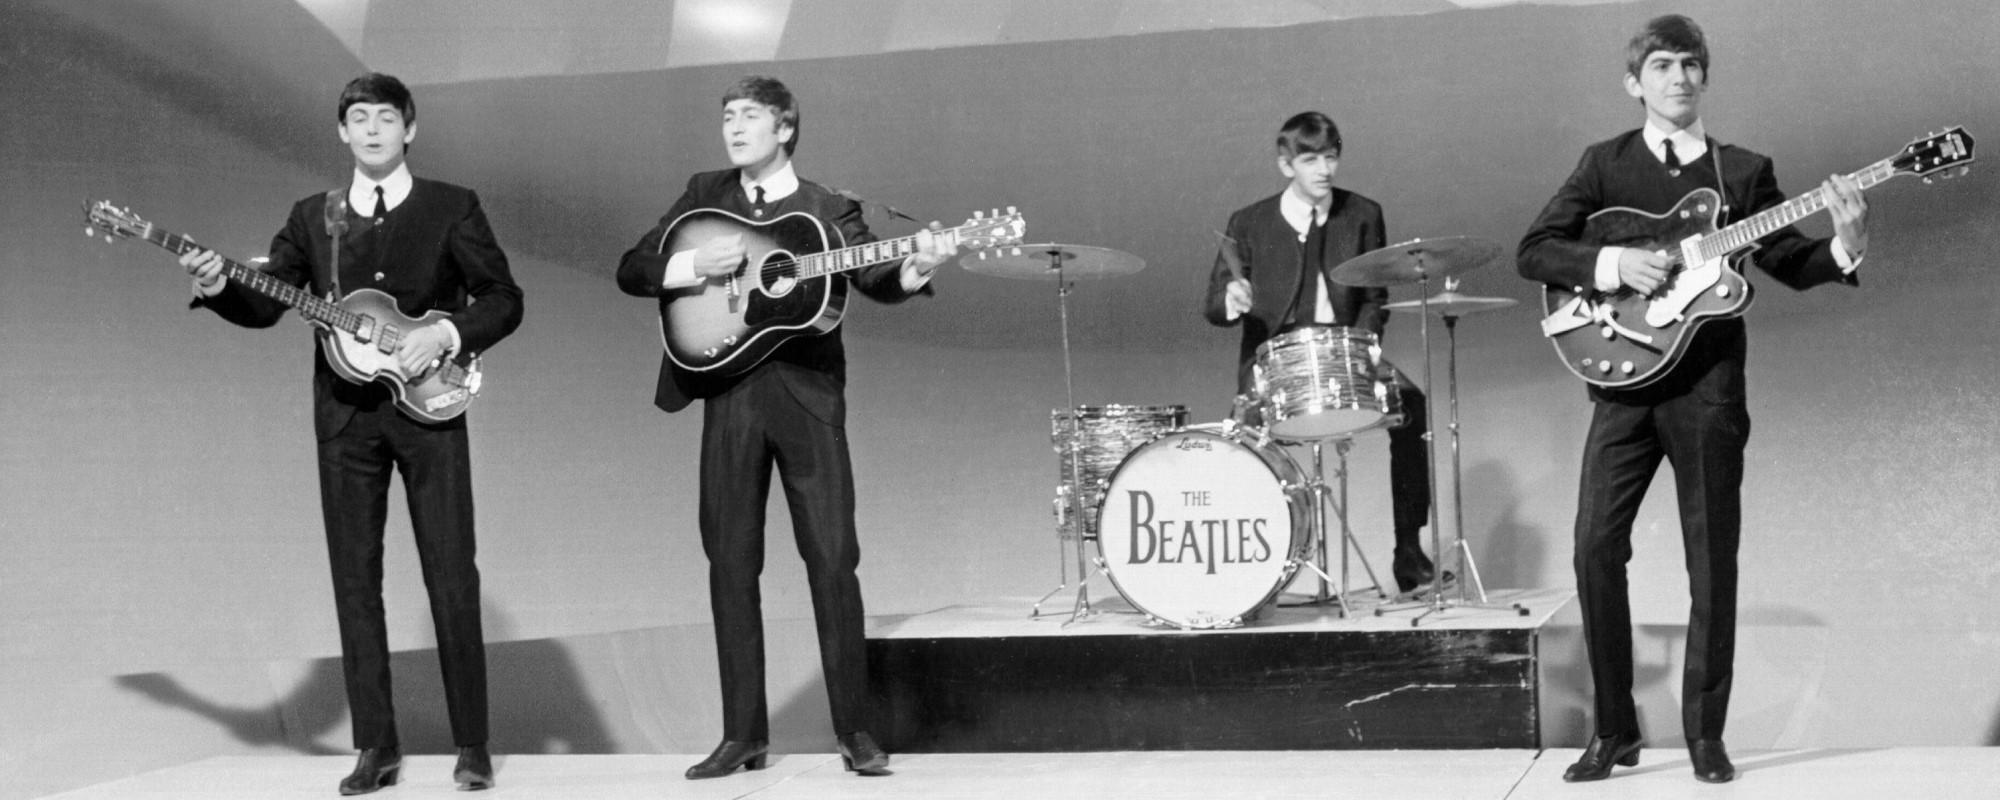 The Beatles Made History by Having the Top Five Singles on the ‘Billboard’ Hot 100 Sixty Years Ago